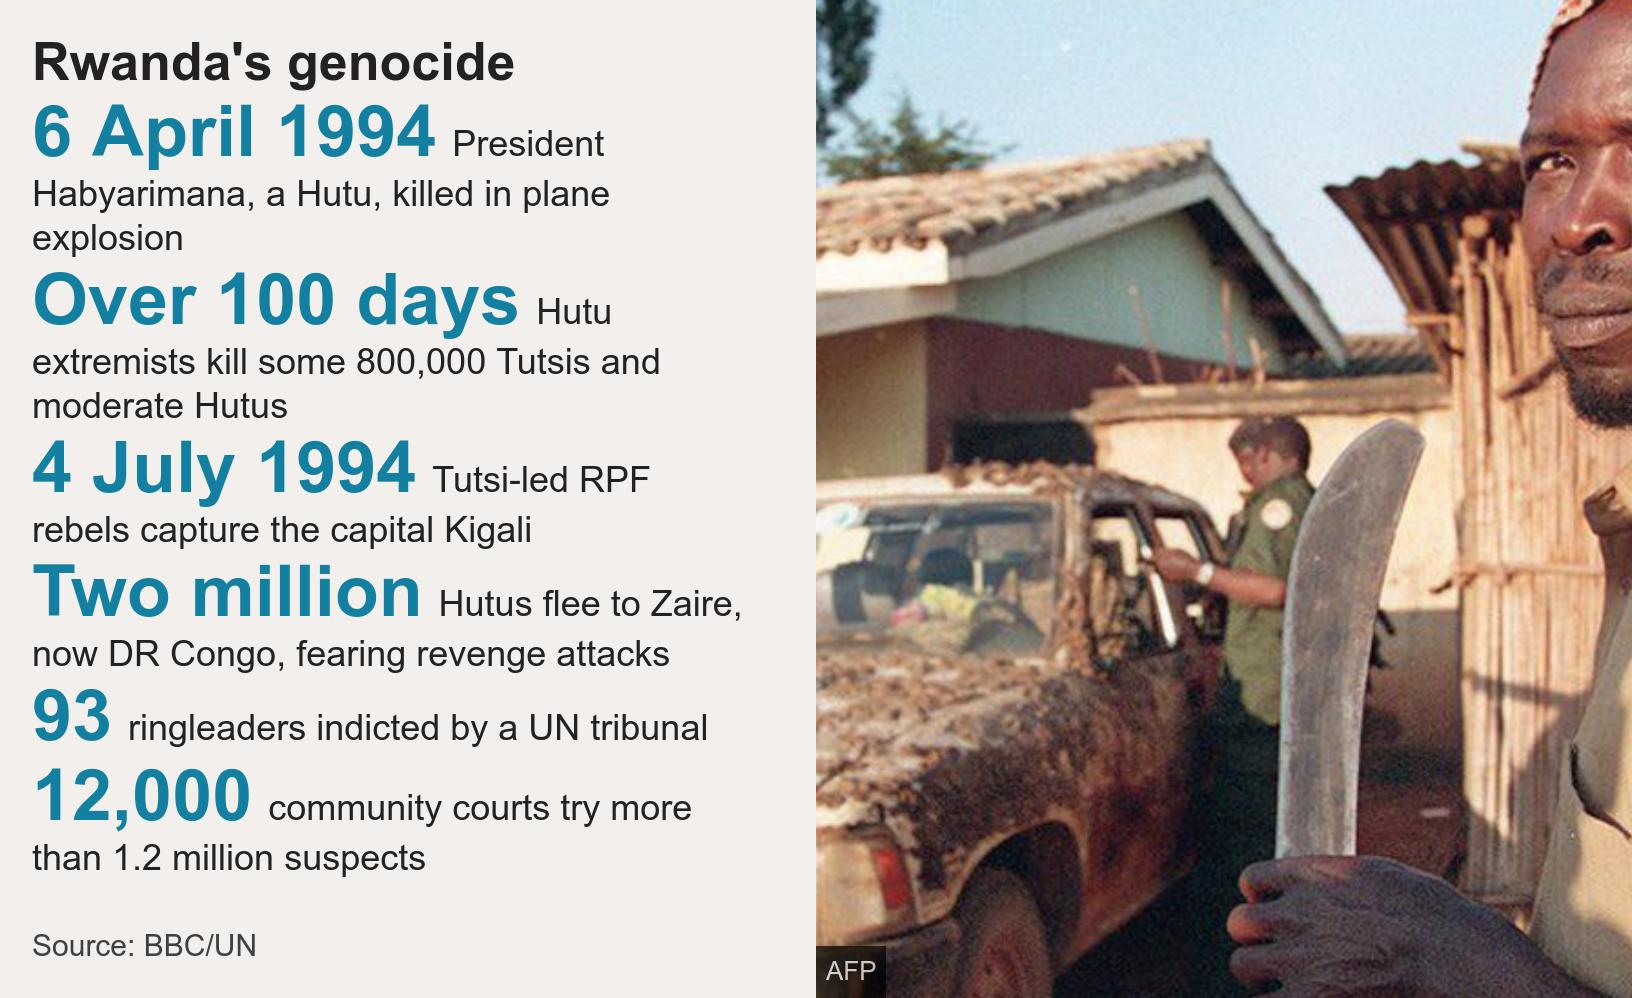 A fact box about the Rwandan genocide